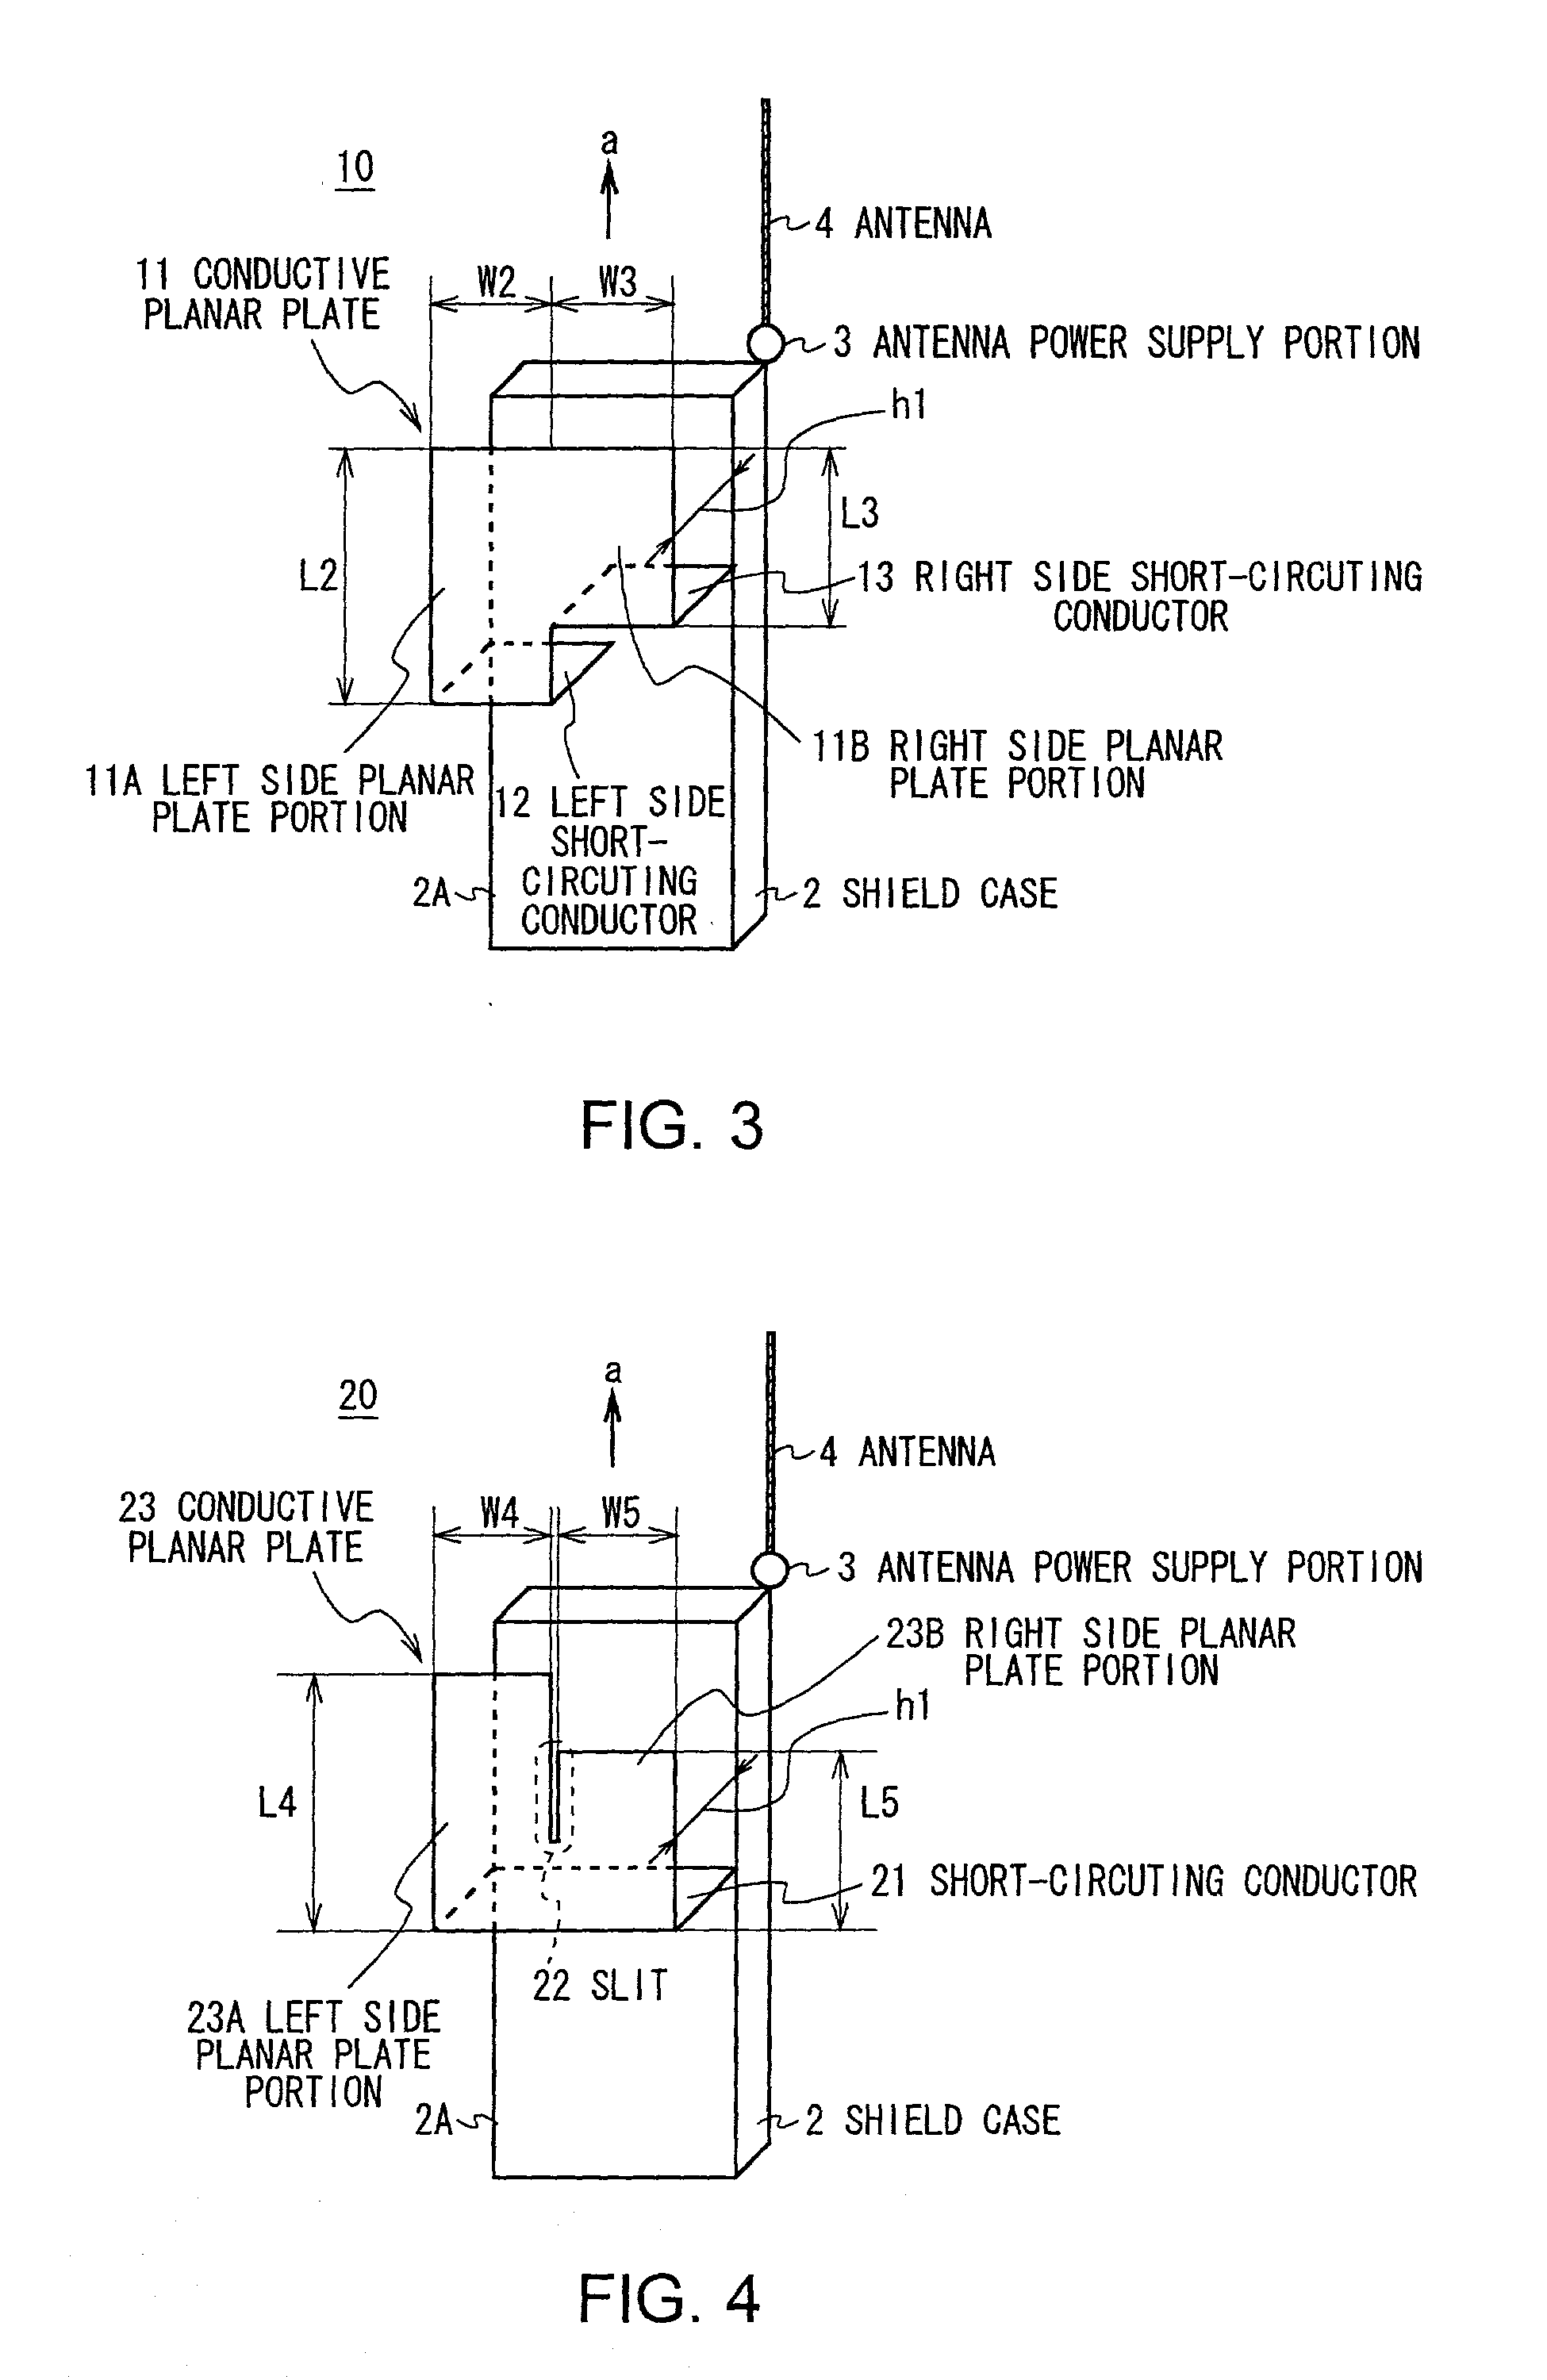 Antenna device and portable wireless communication apparatus